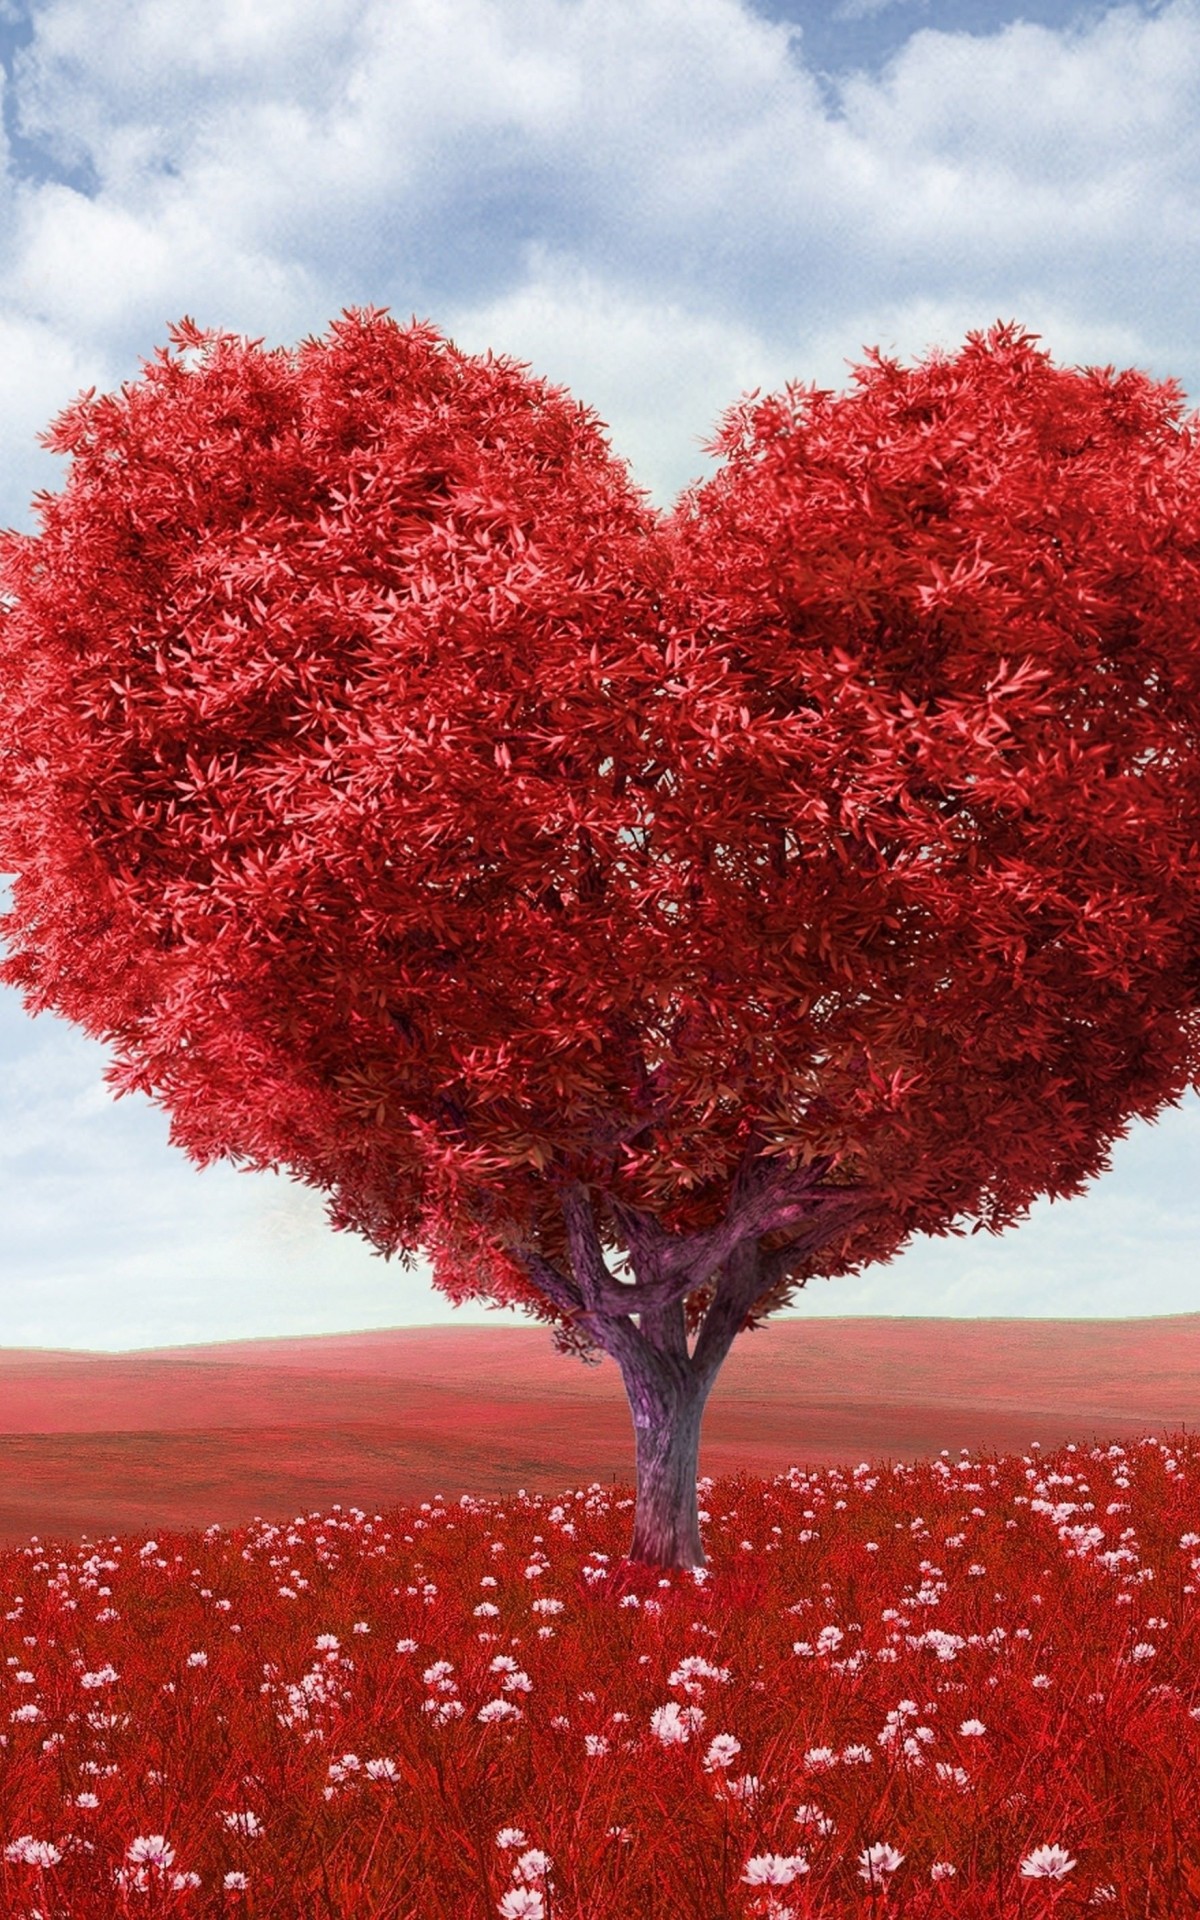 The Tree Of Love Wallpaper for Amazon Kindle Fire HDX